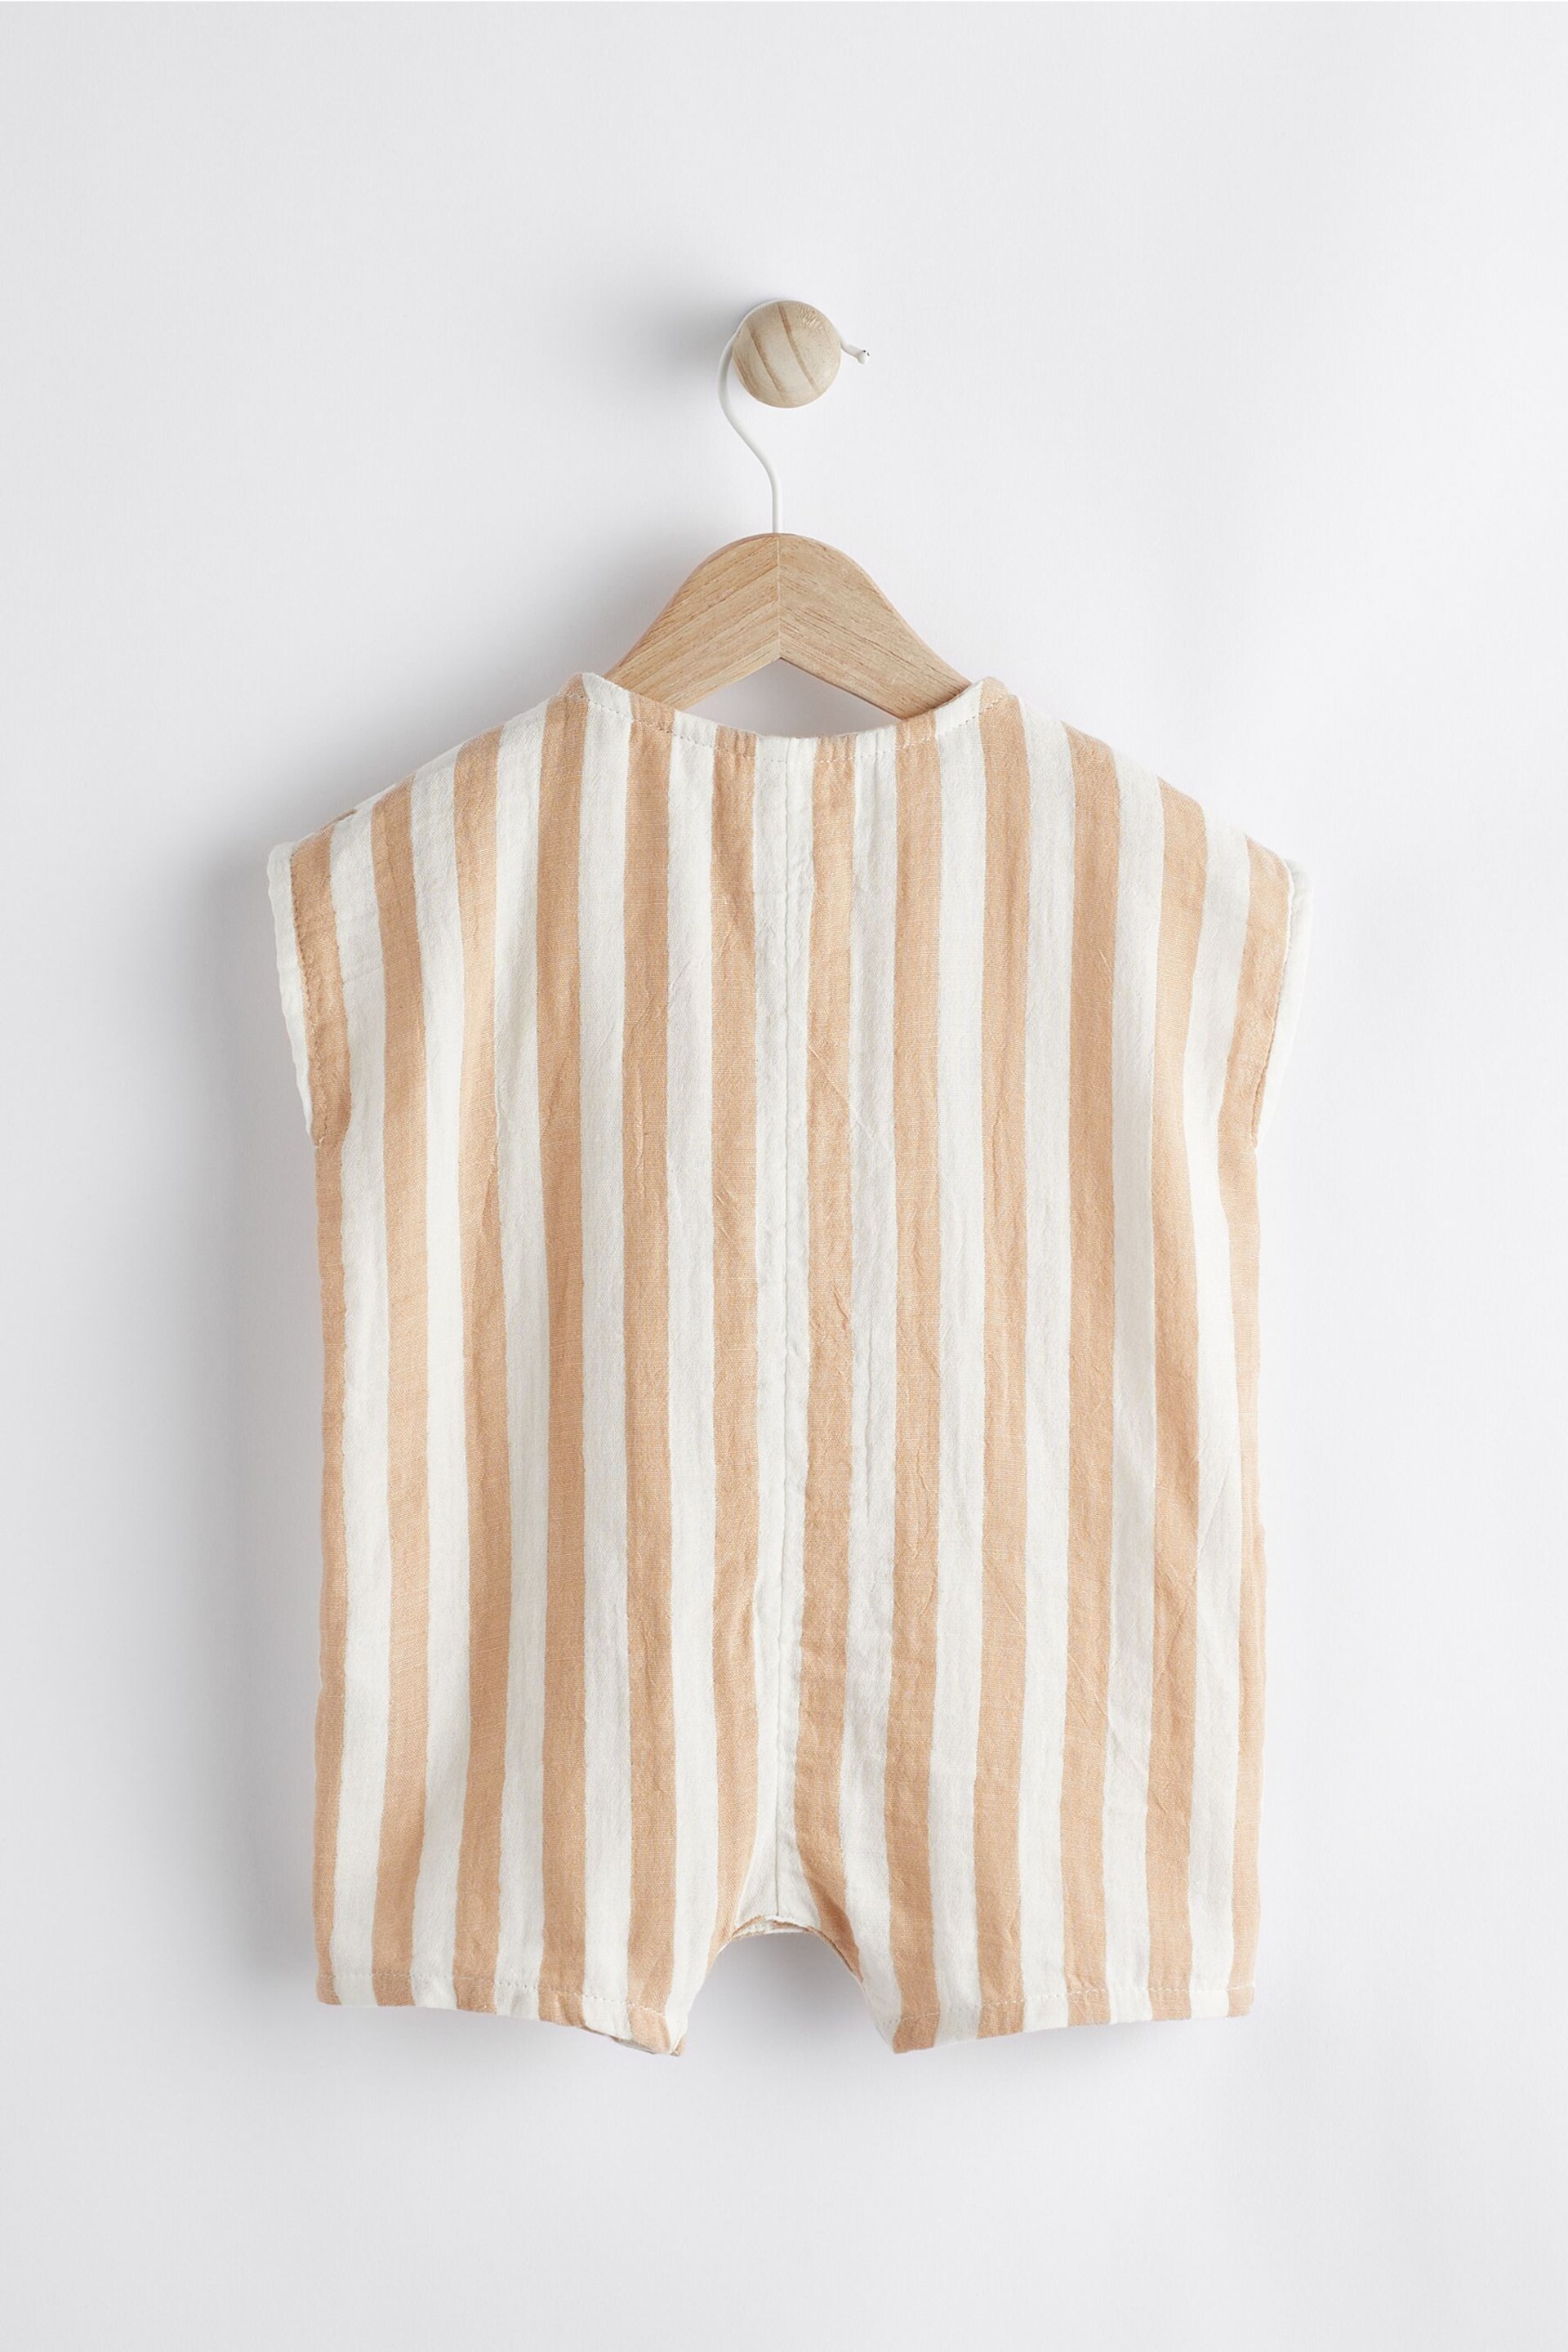 Rust/White Stripe Baby Woven Romper (0mths-2yrs) - Image 6 of 11